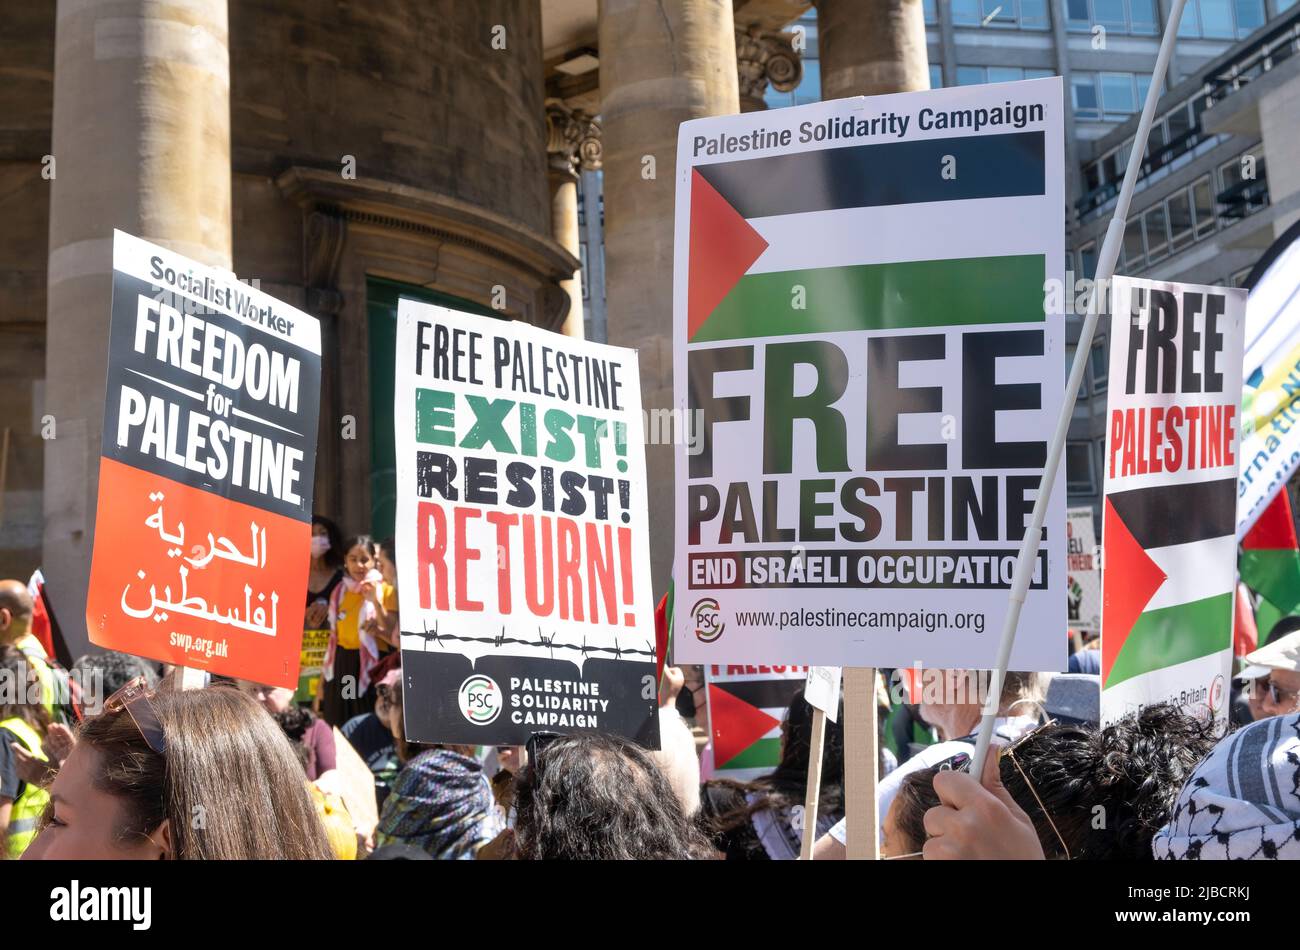 Campaign sign at the End Apartheid - Free Palestine demonstration march, London, in protest of 74 years of Nakba - the creation of Israel. Stock Photo